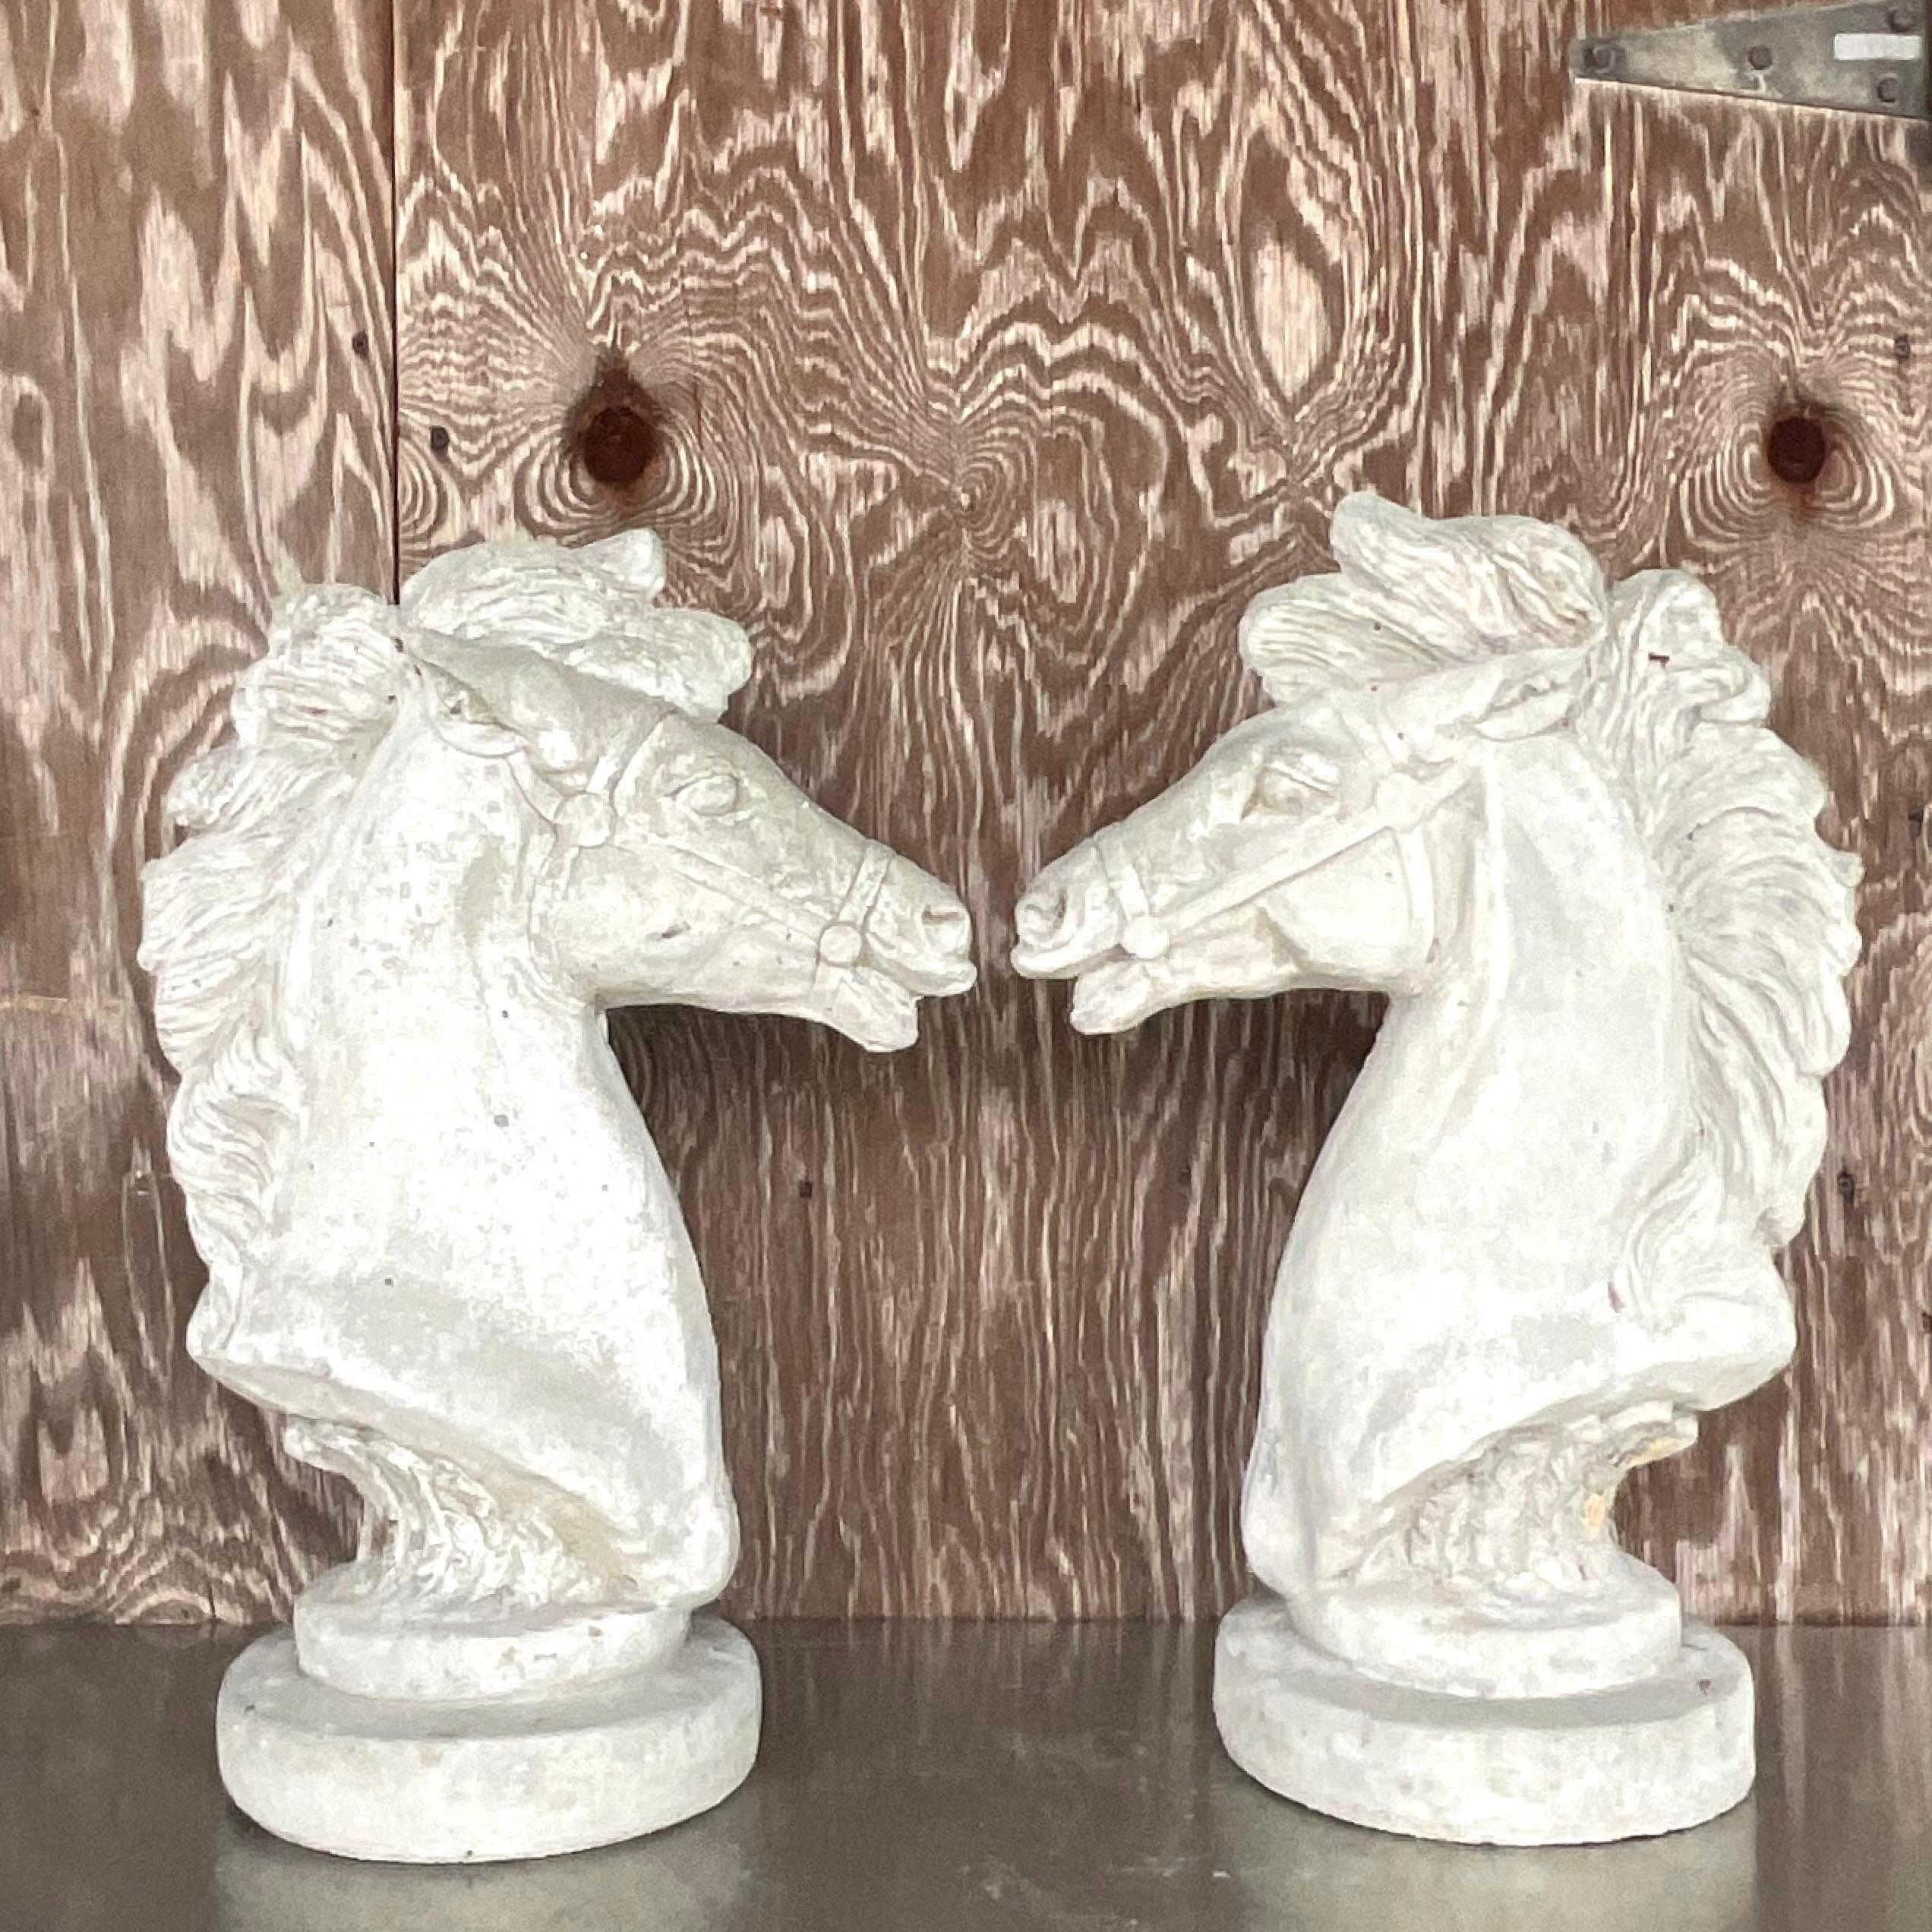 A fabulous pair of vintage Boho horse heads. Chic cast concrete with a dramatic horse pose perfect indoors or outdoors. You decide! Acquired from a Palm Beach estate.